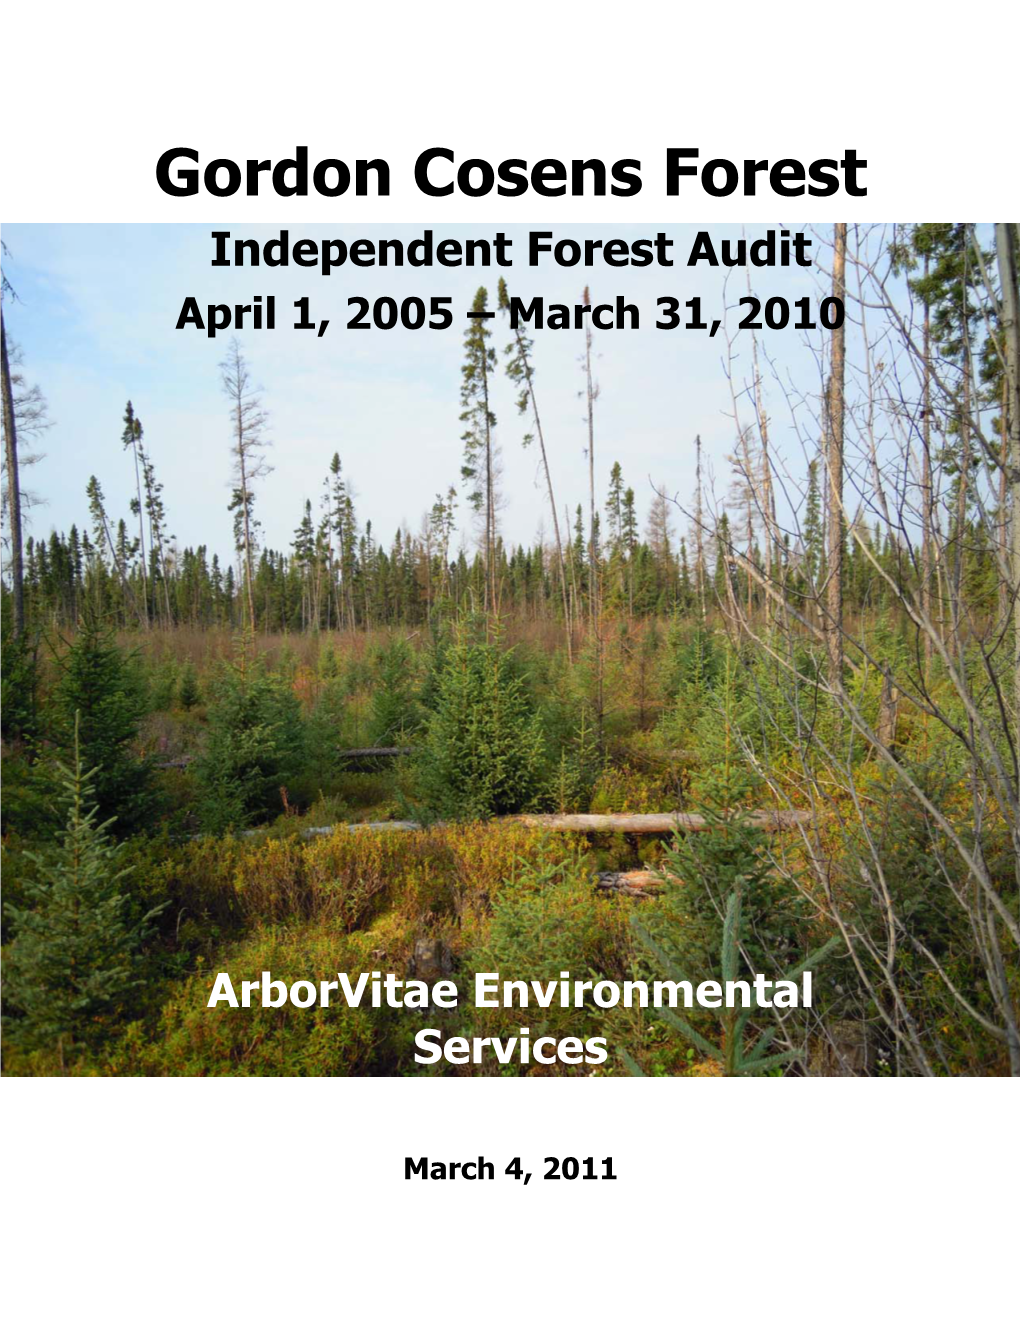 Gordon Cosens Forest Independent Forest Audit April 1, 2005 – March 31, 2010